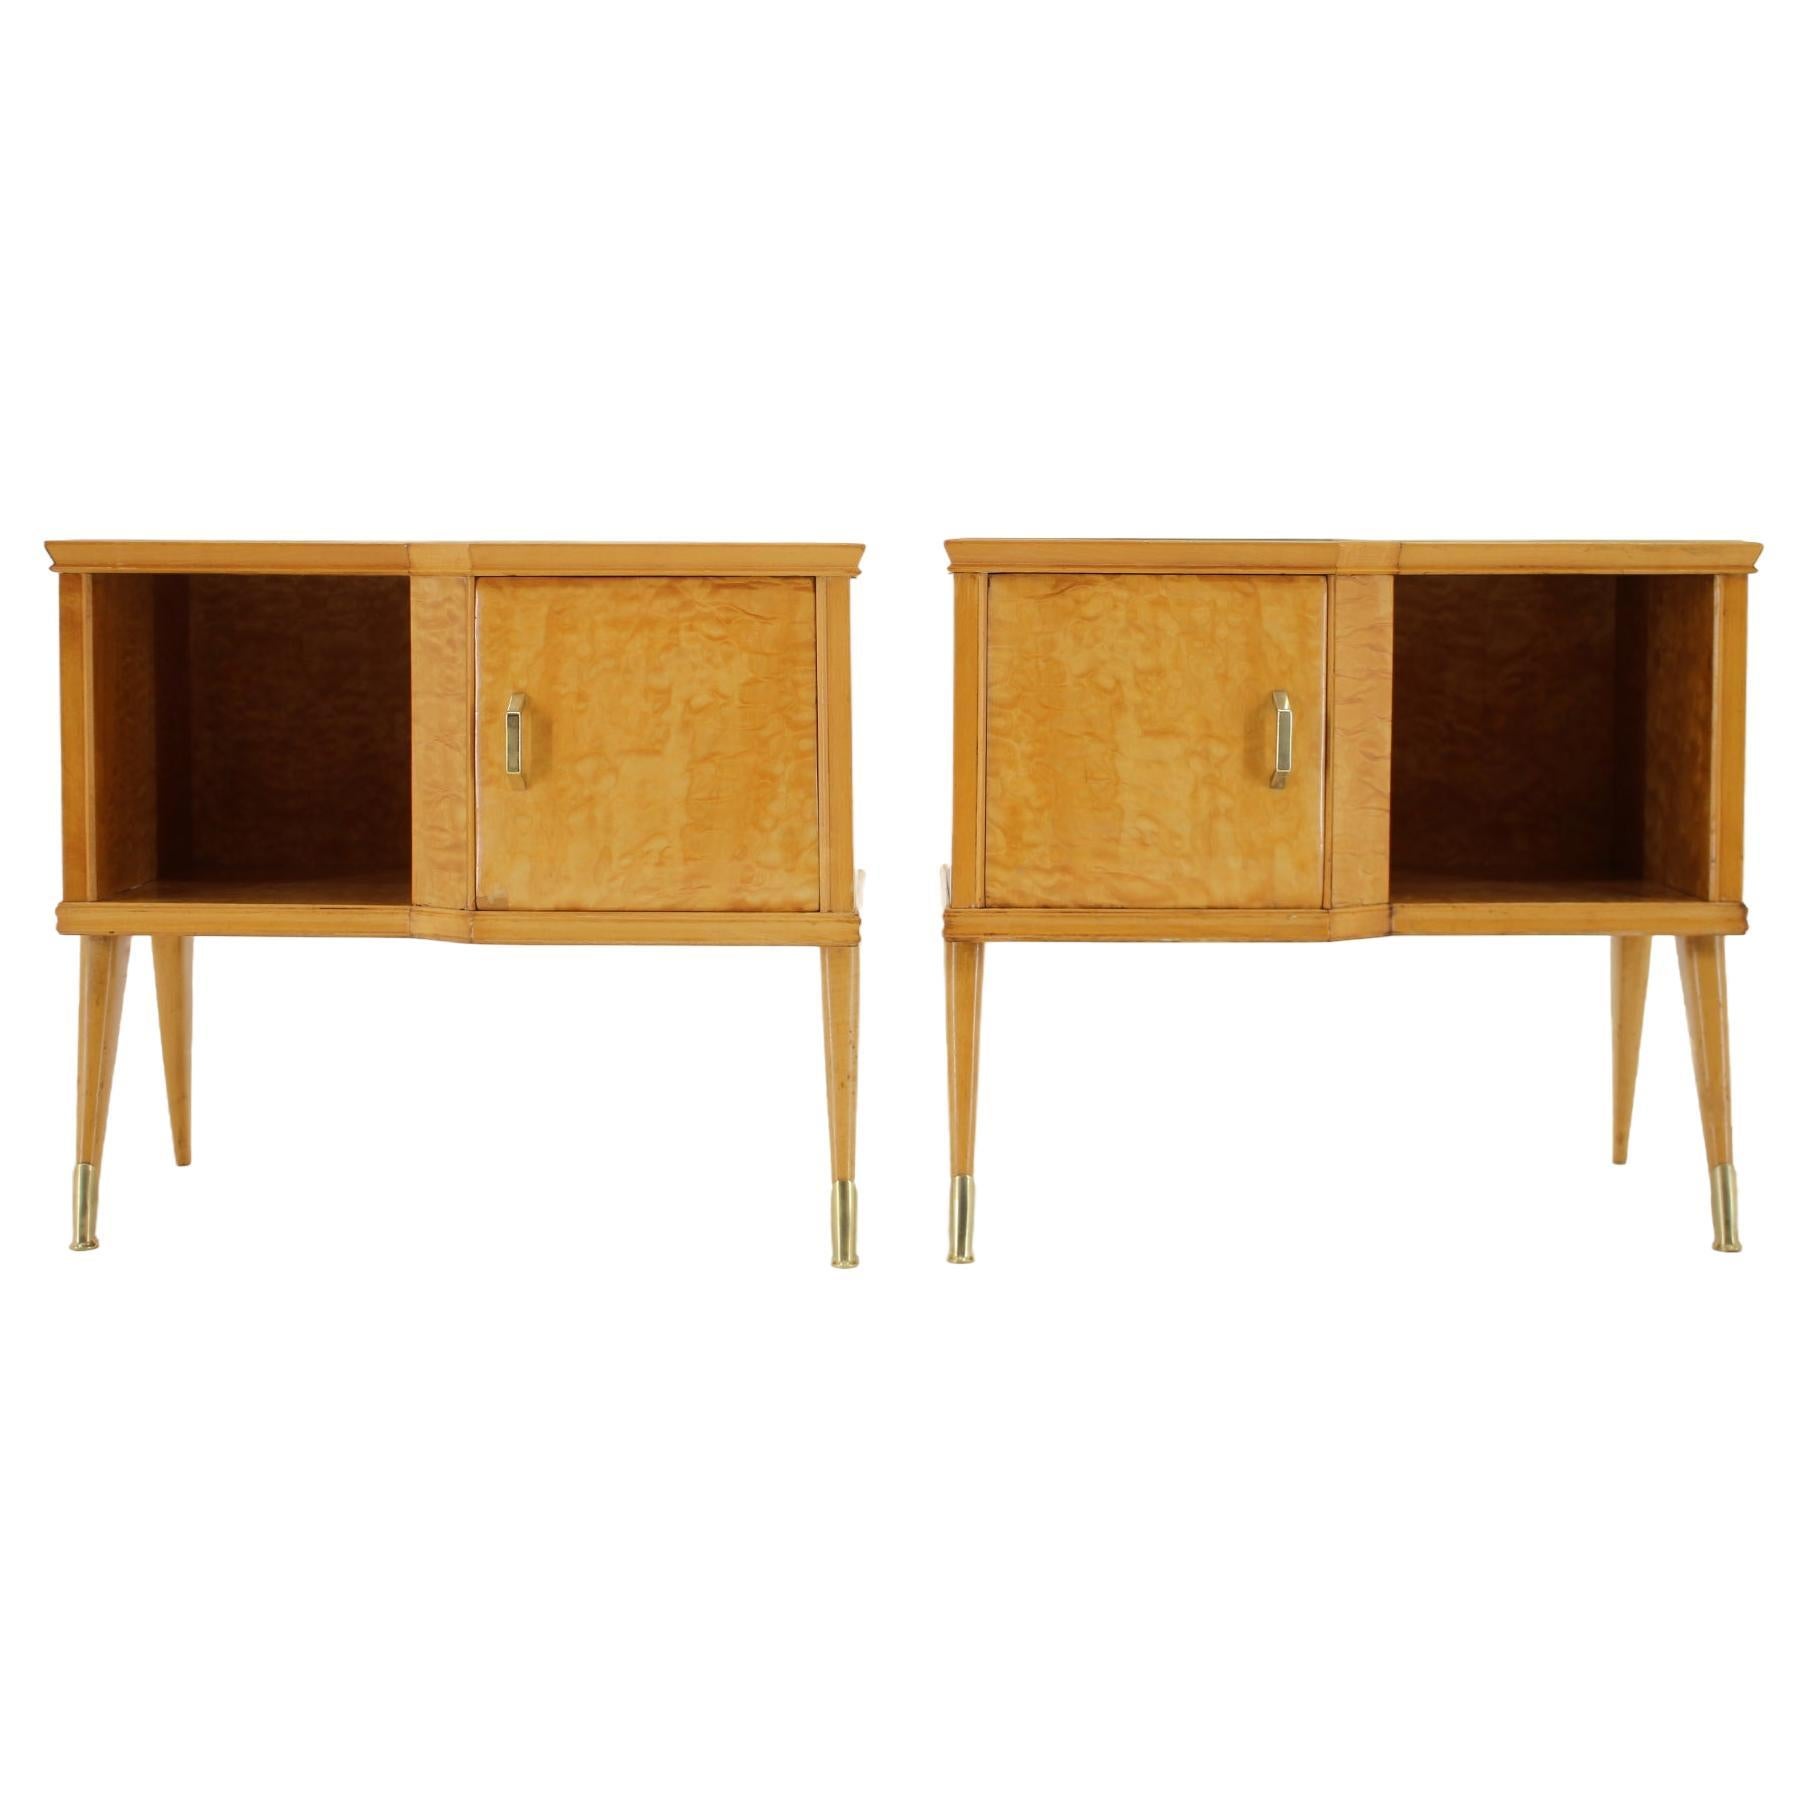 1960s Pair of Italian Bedside Tables in High Gloss Finish